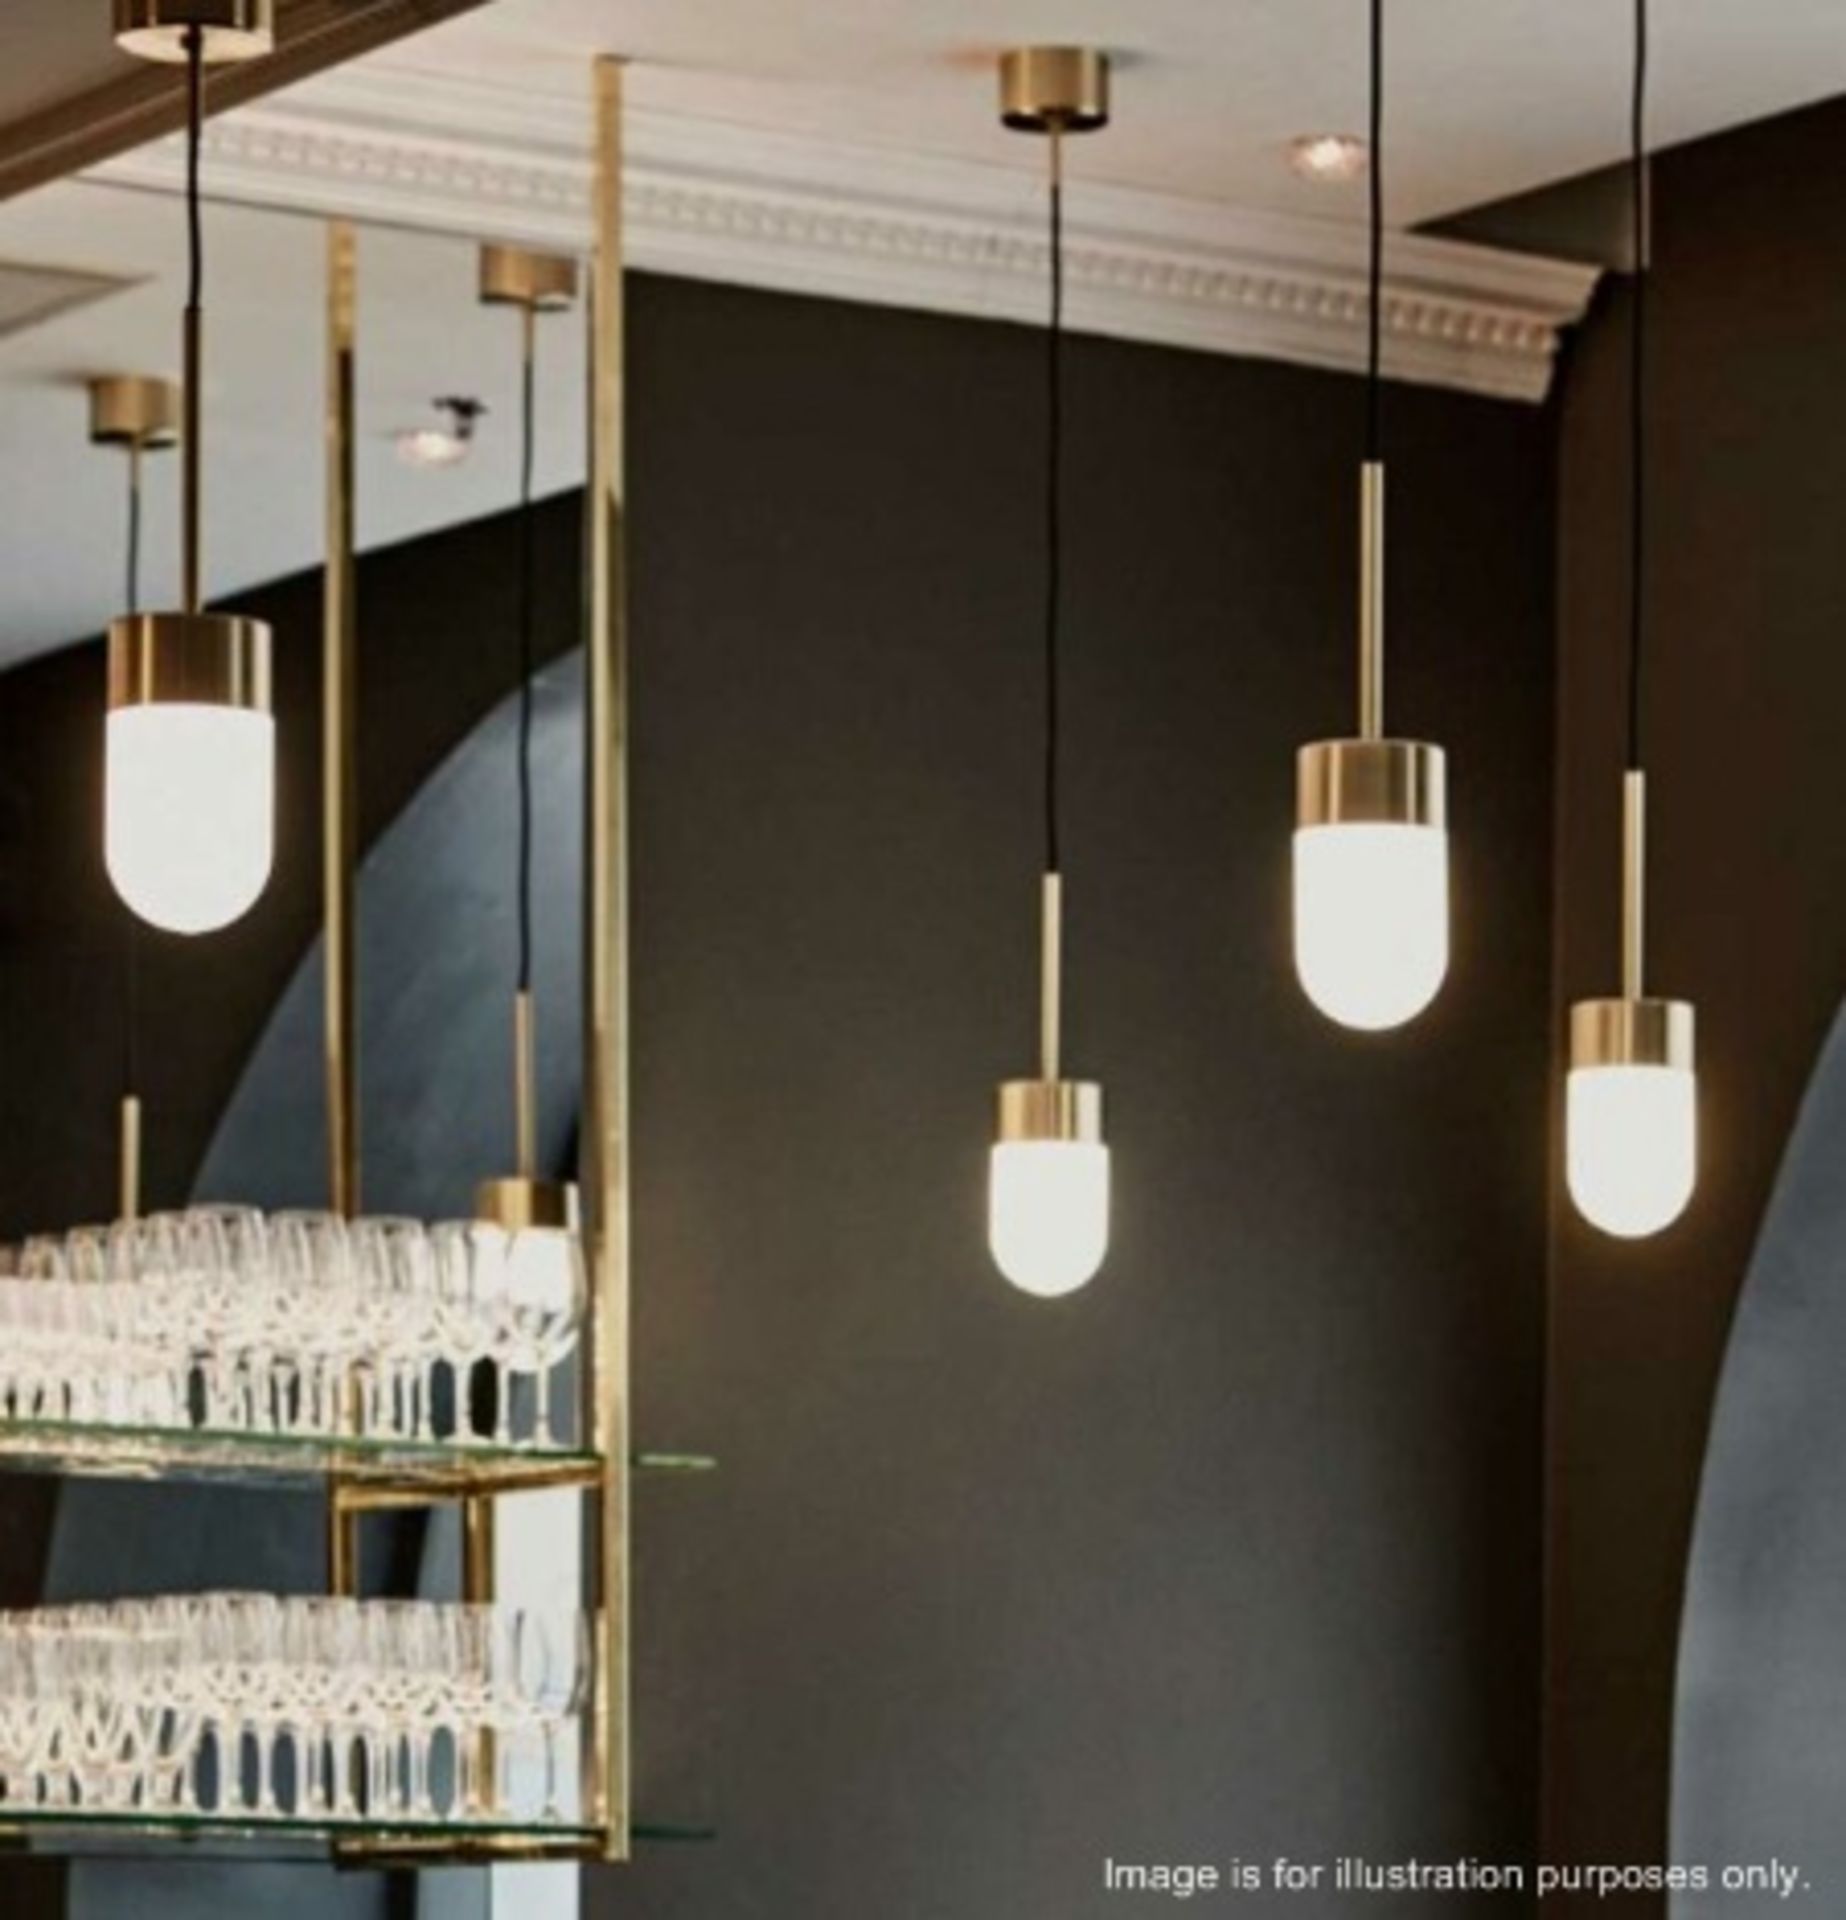 A Pair Of Rubn 'VOX' Commercial Pendant Lights In Polished Brass - Original Value £487.00